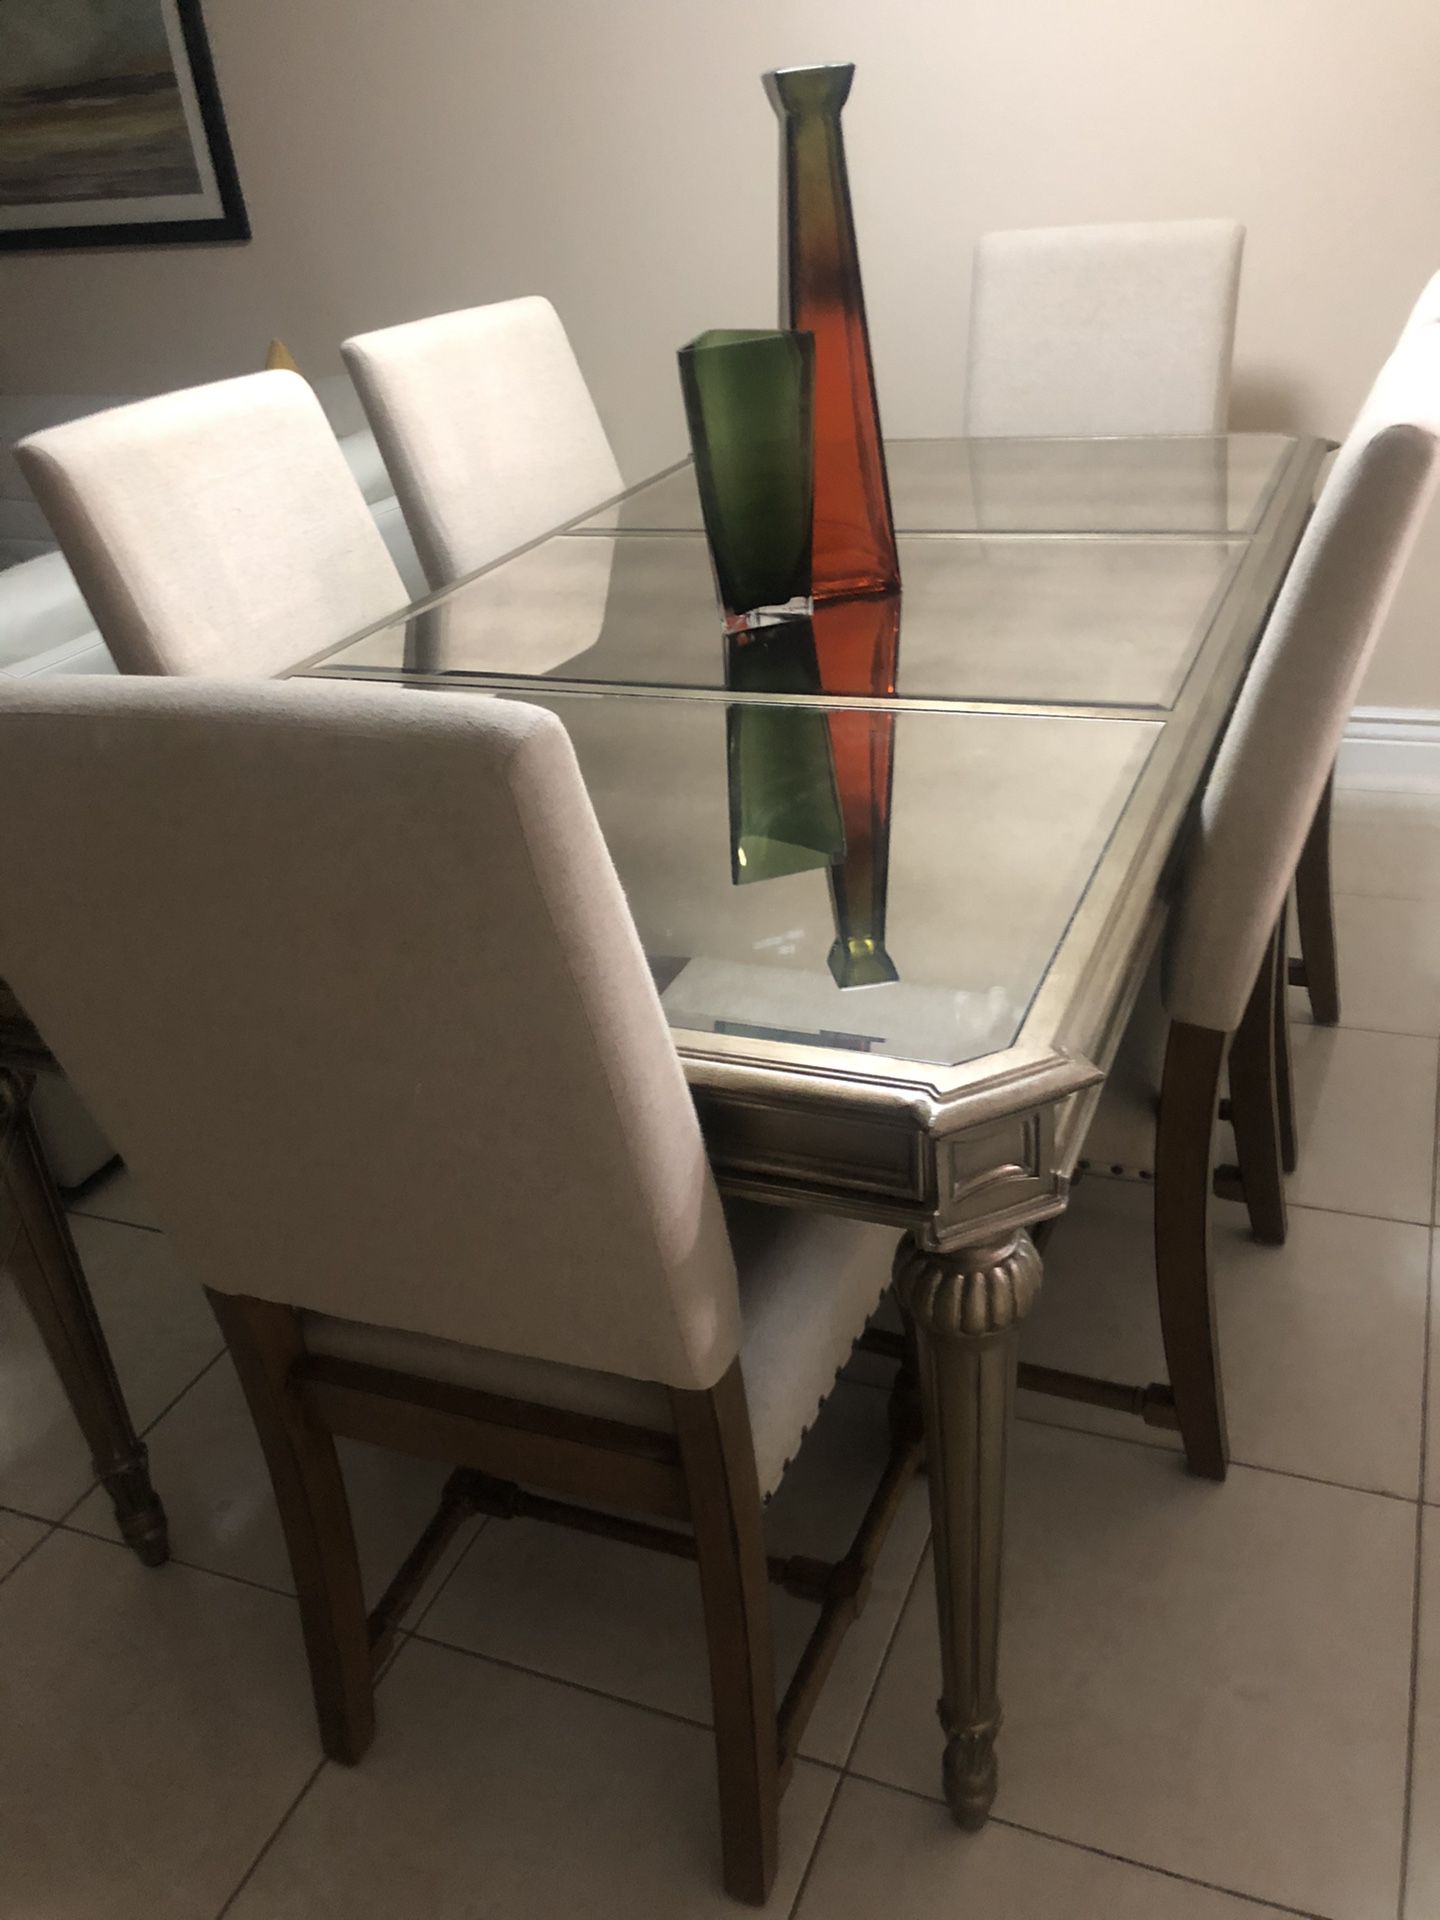 Markdown Dinner Table from Macys with 6 chairs $300 Color Gold